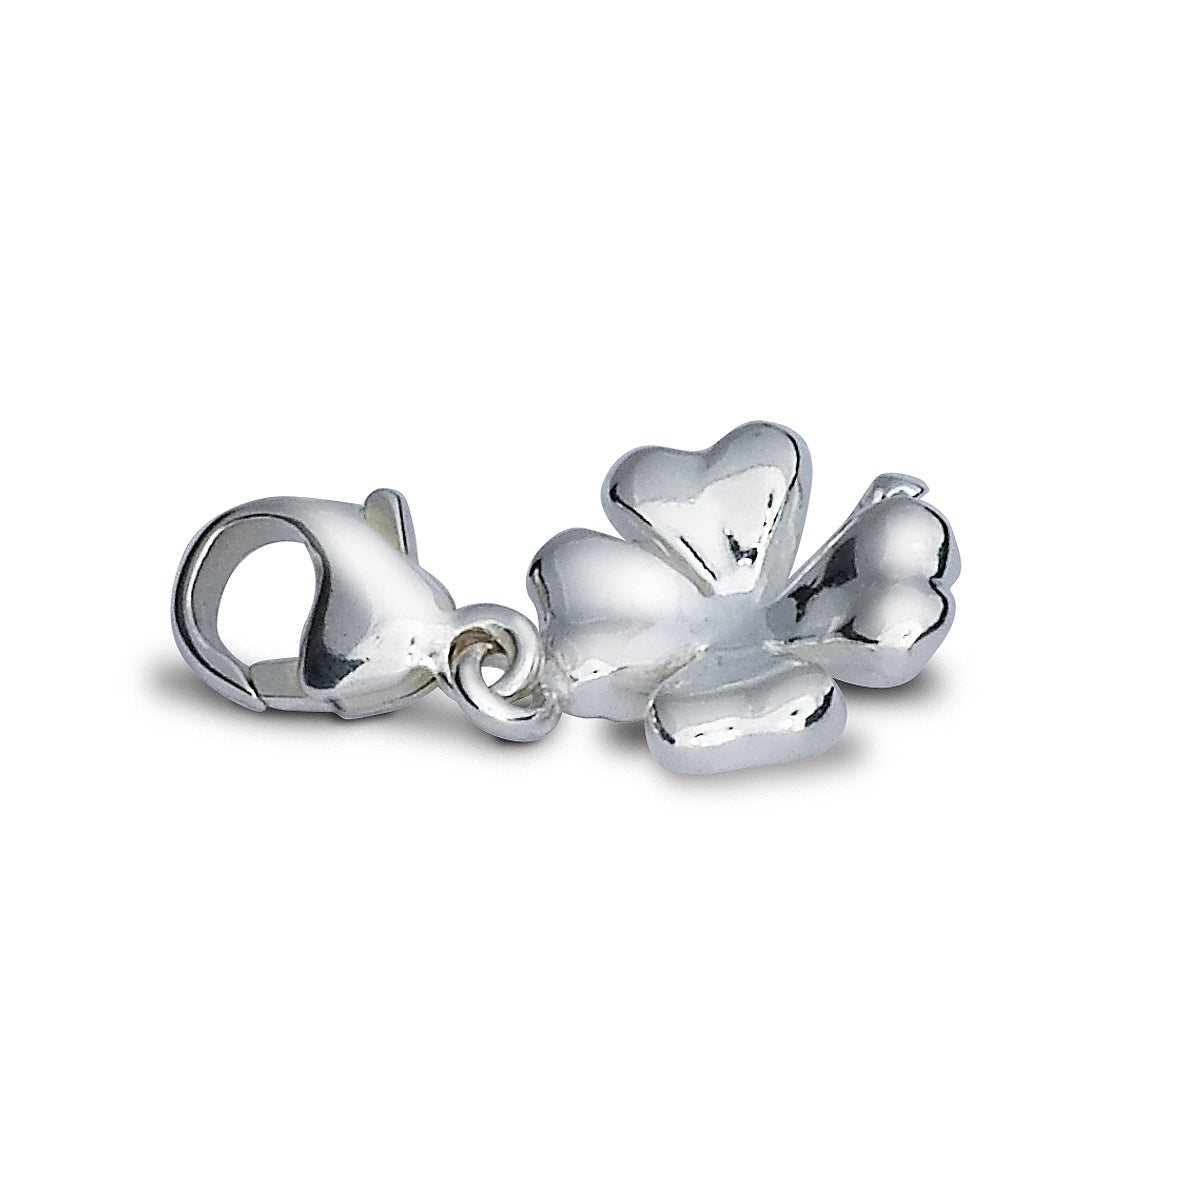 Carry good luck every day with this exquisite silver four leaf clover charm with clip clasp. FREE UK delivery.